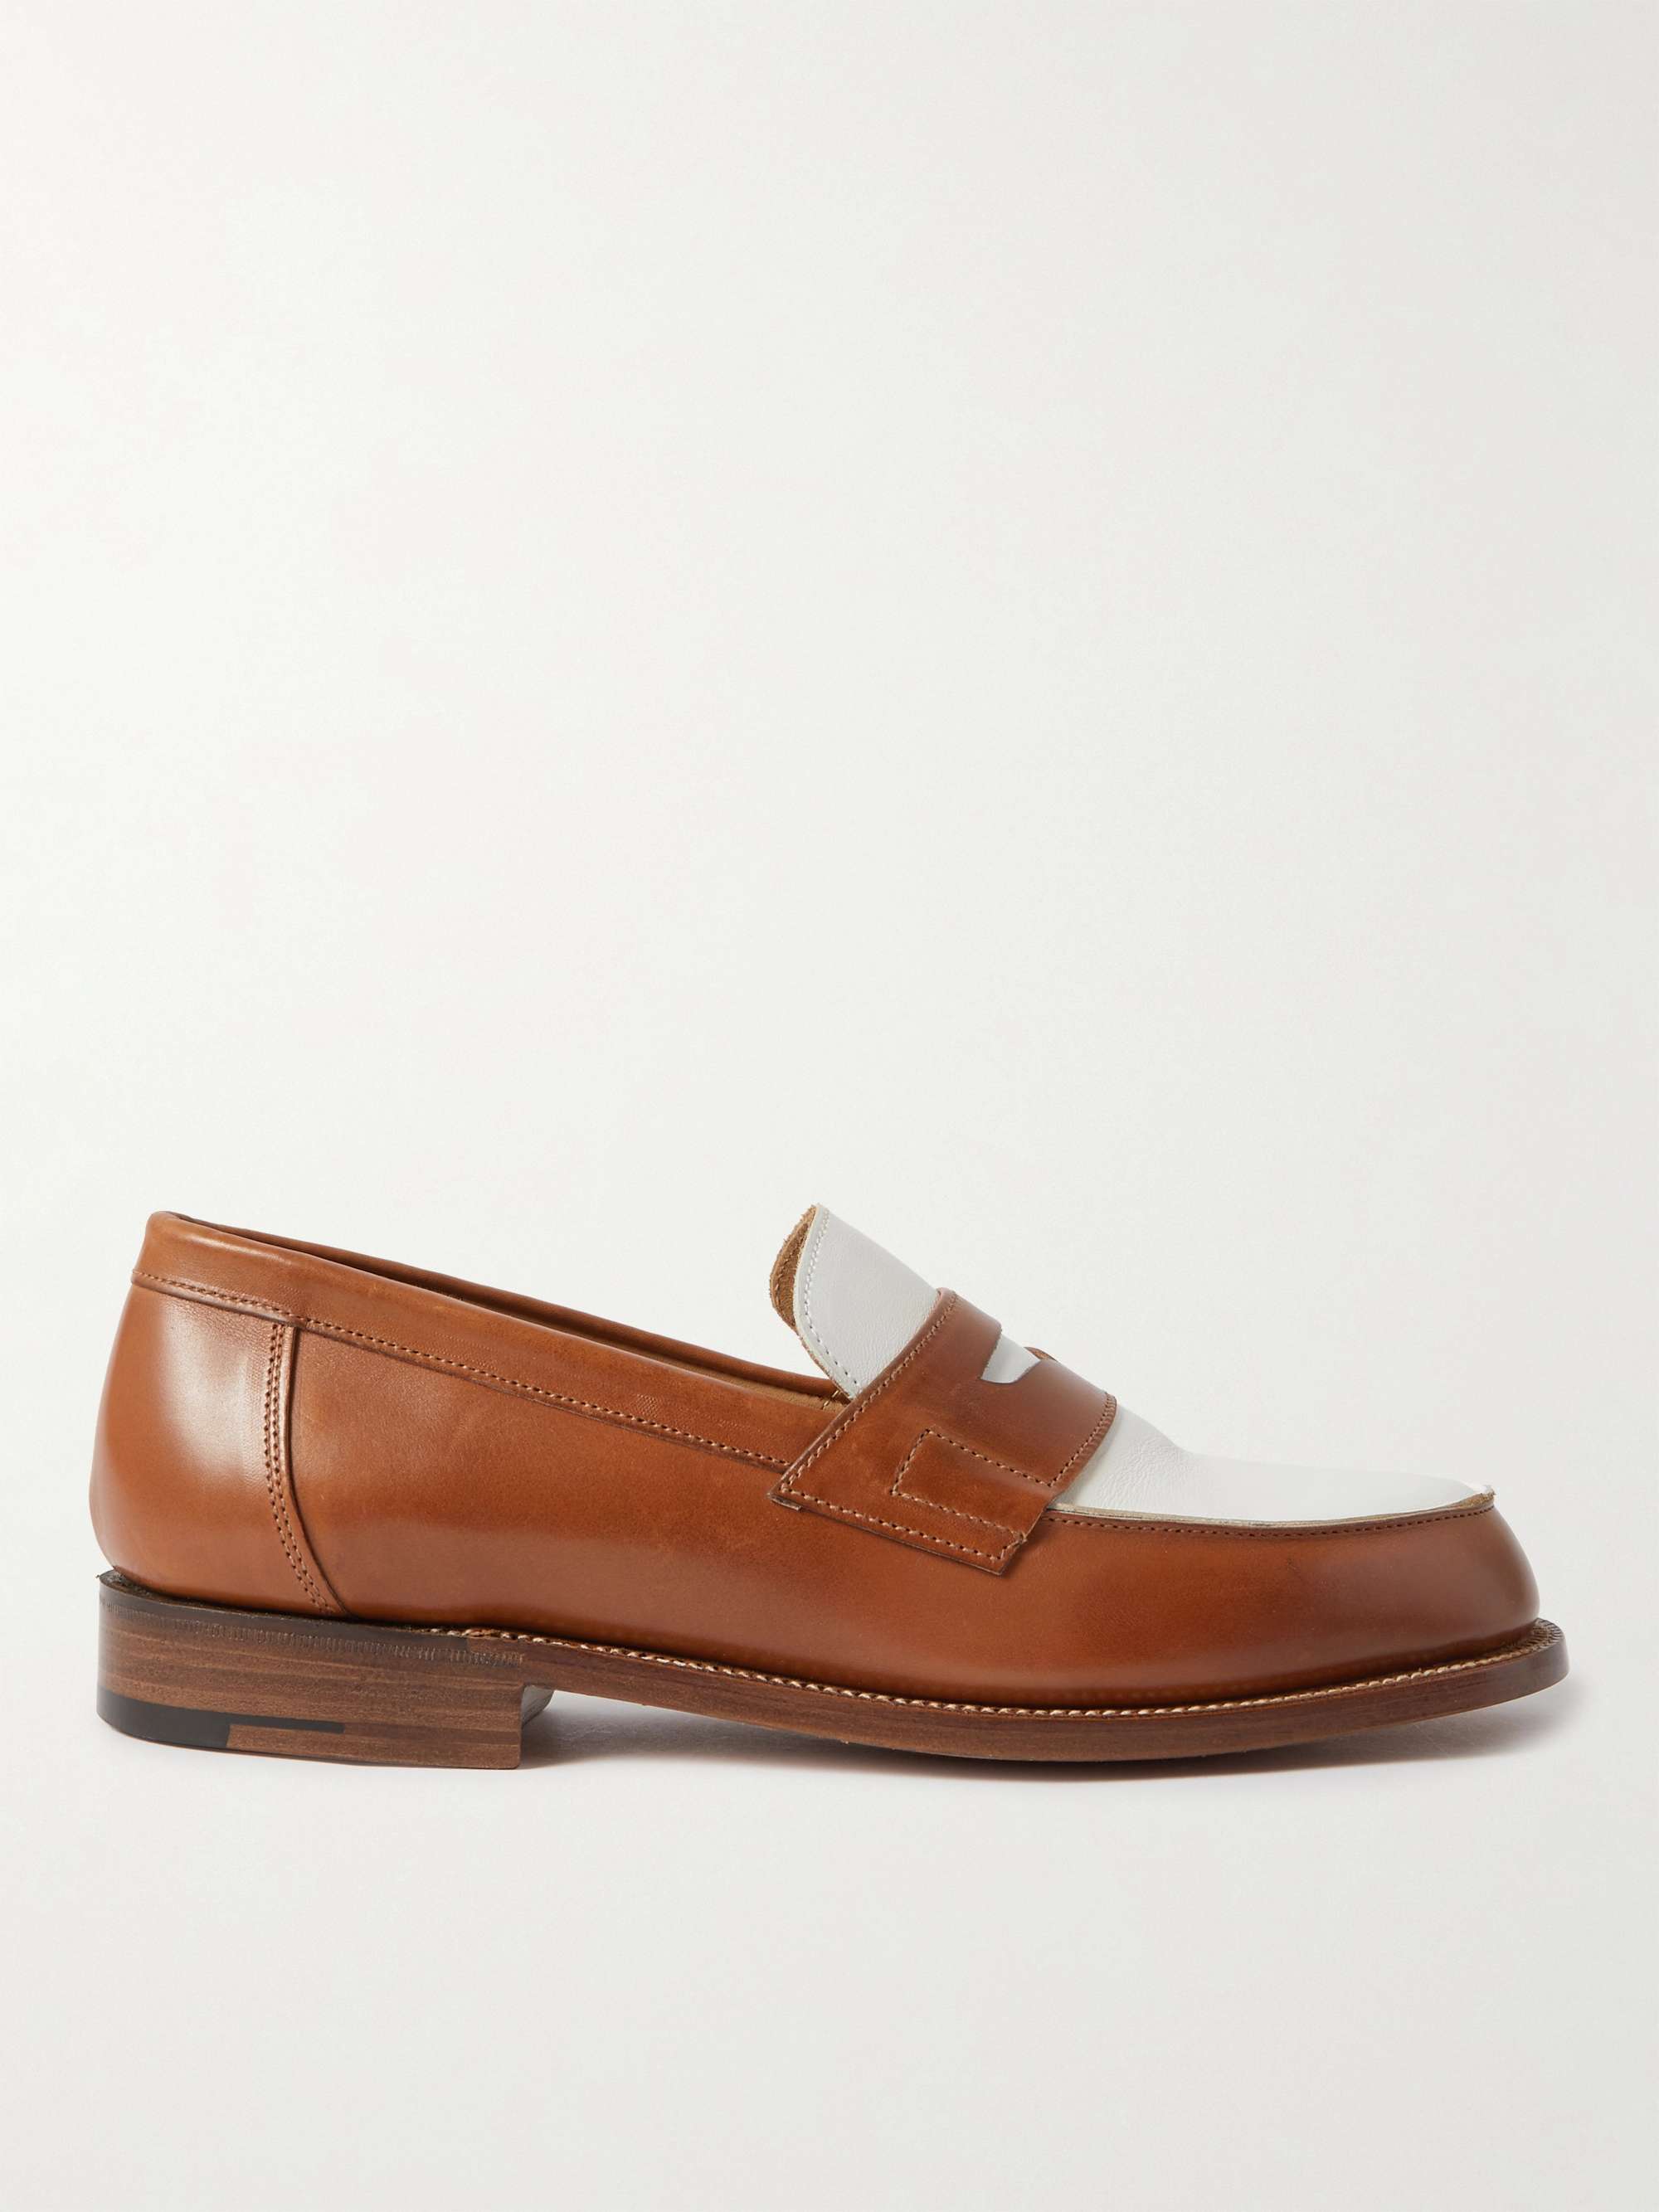 GRENSON Epsom Two-Tone Leather Penny Loafers | MR PORTER